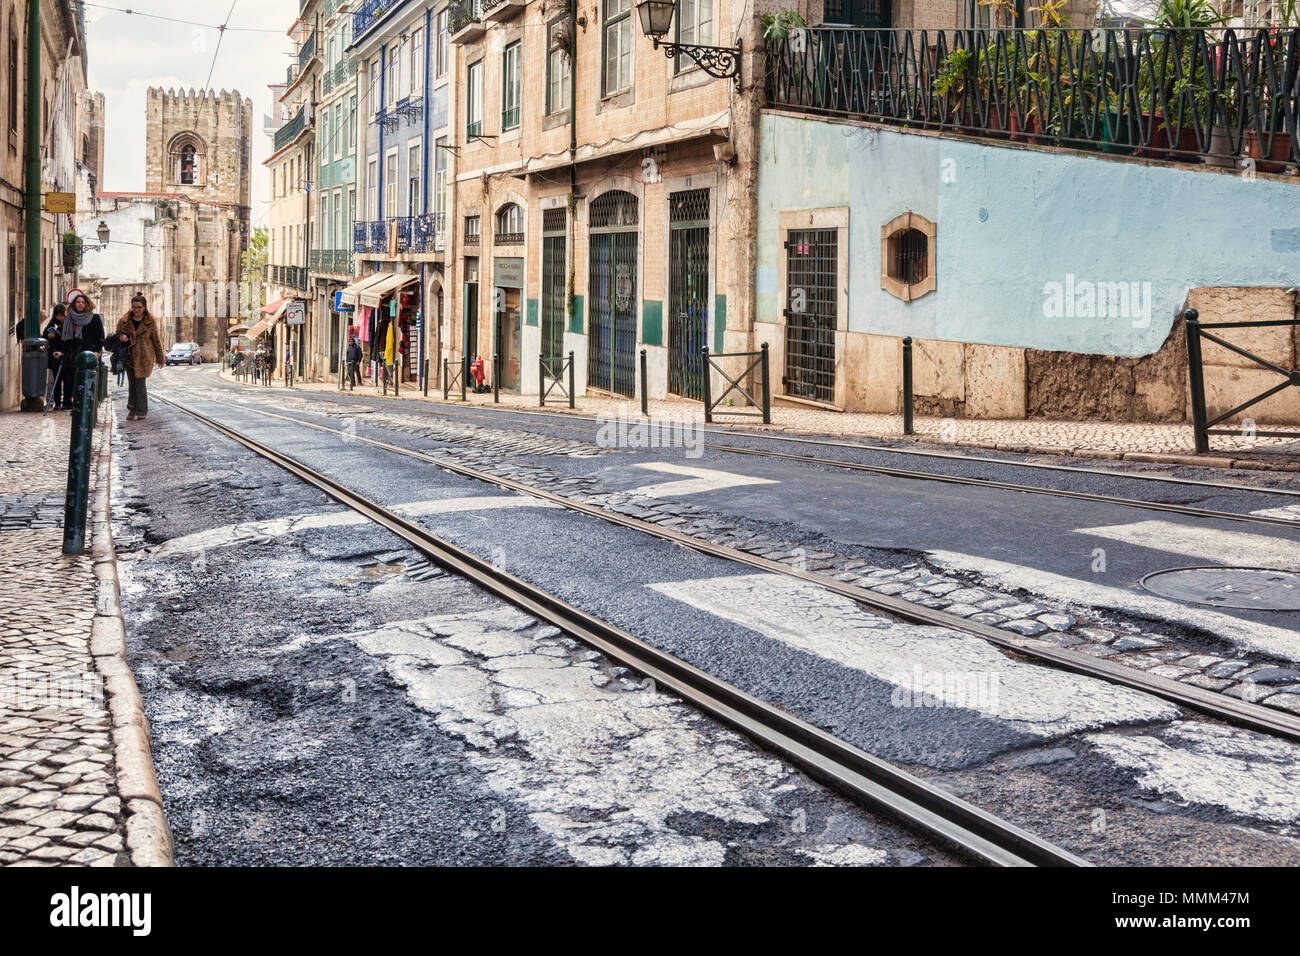 1 March 2018: Lisbon Portugal - Road with tram track in poor condition in the Alfama District. Lisbon Cathedral in the background. Stock Photo